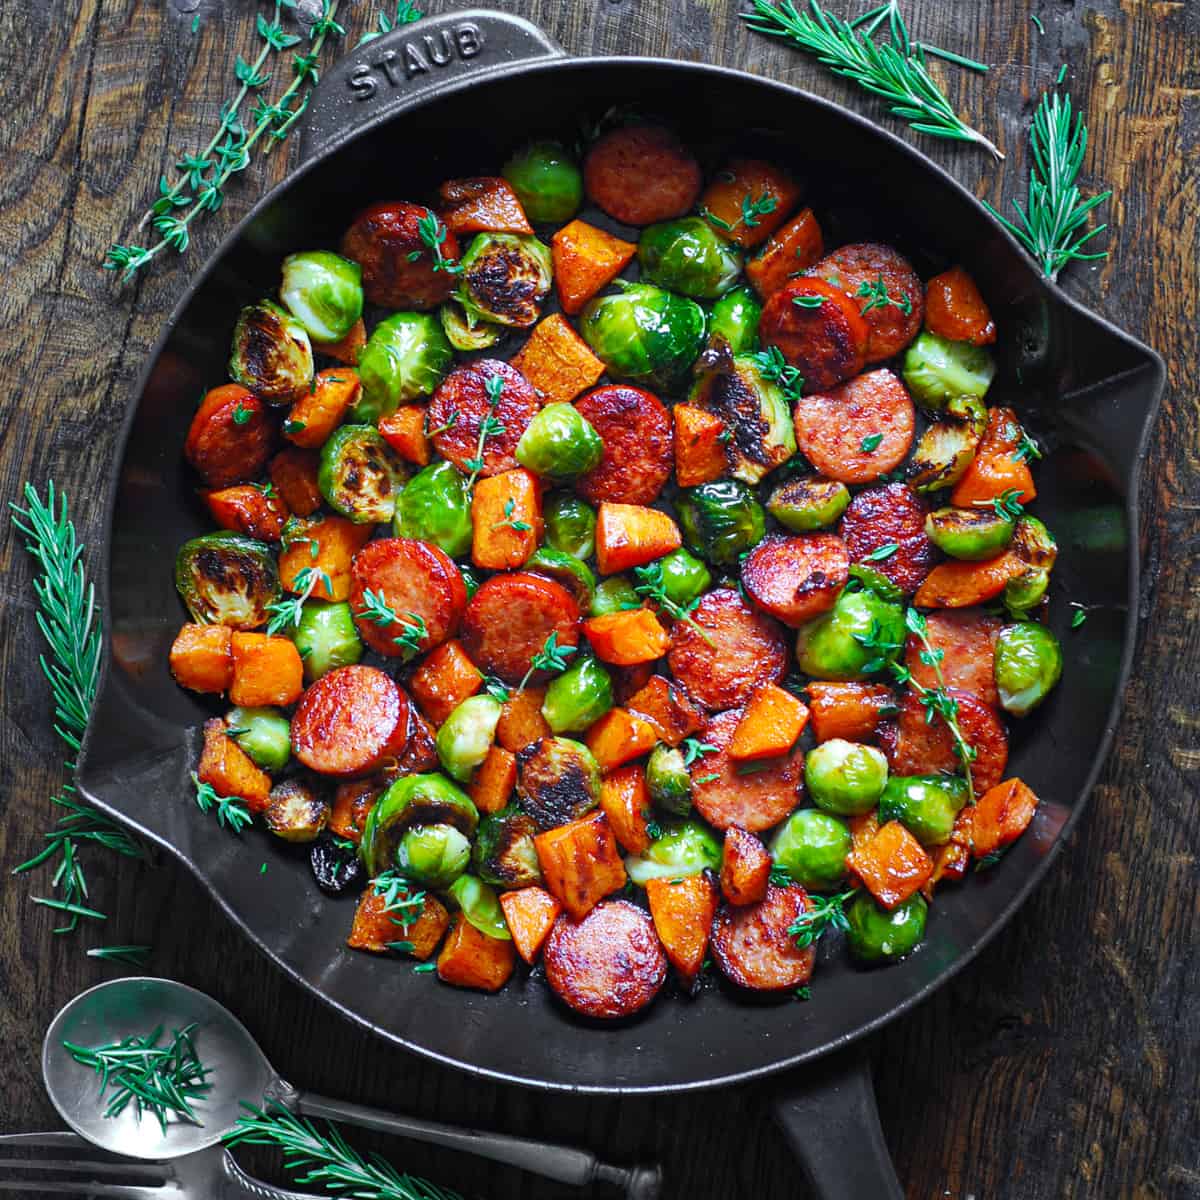 Autumn Sausage Dinner with Roasted Veggies (Butternut Squash and Brussels sprouts) in a cast iron skillet.